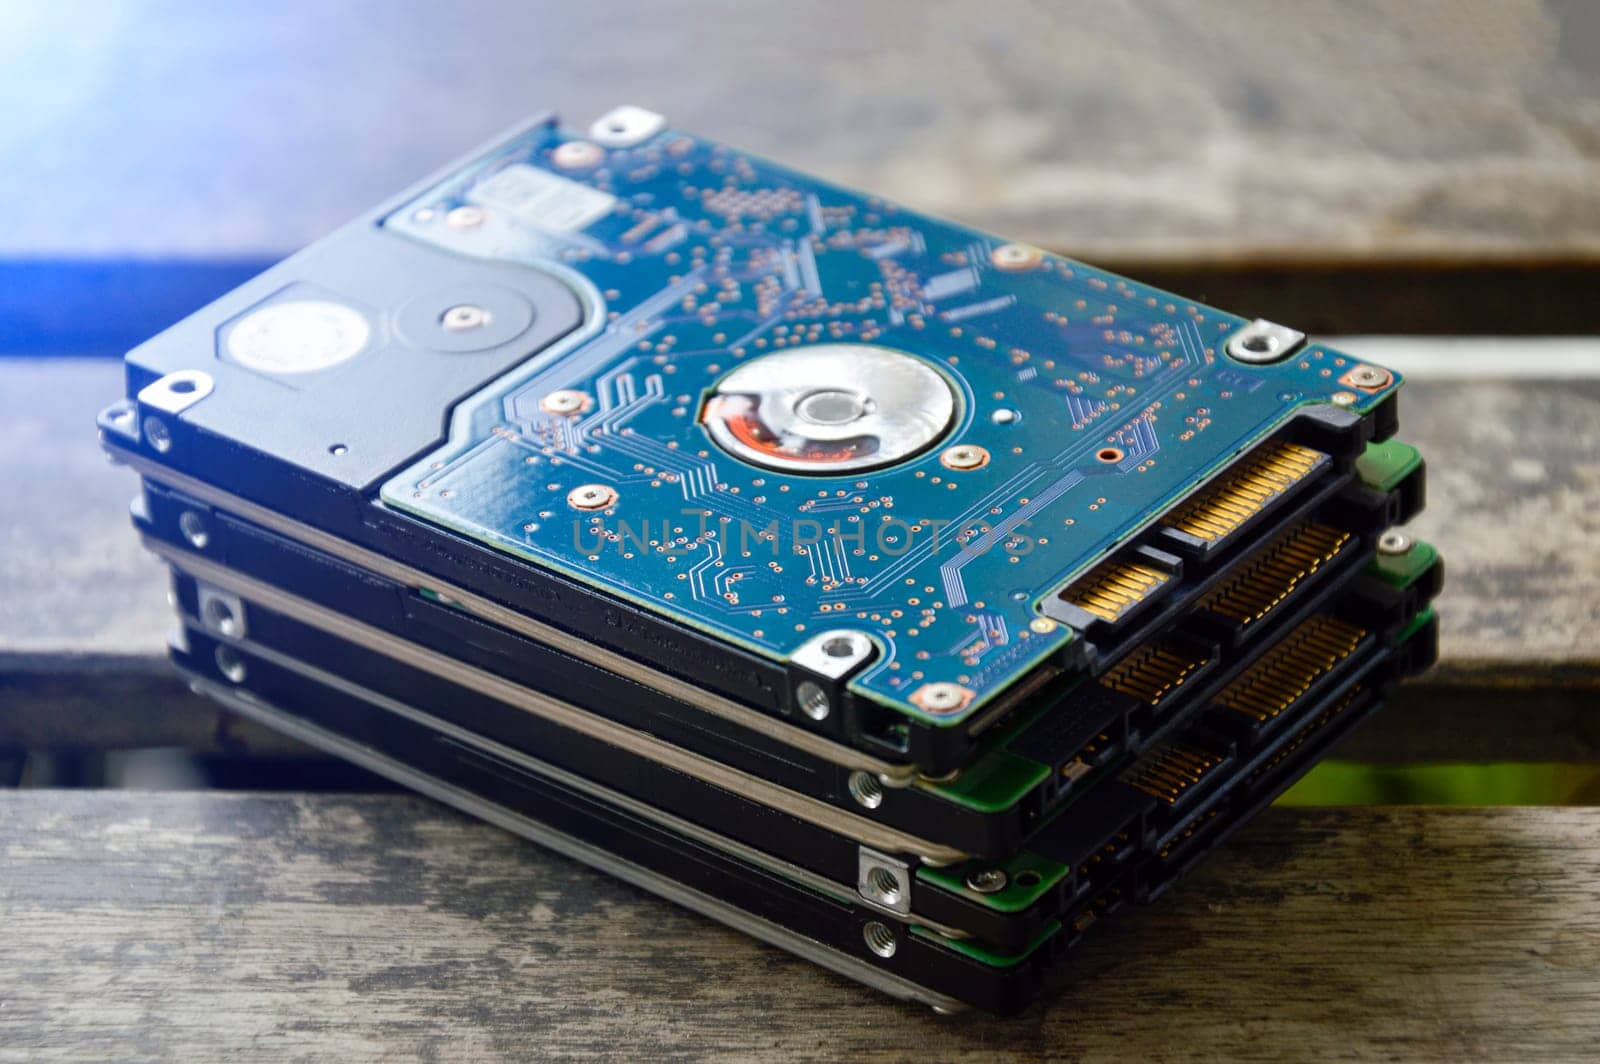 2.5-inch hard drives stacked on top of each other, currently still popular.